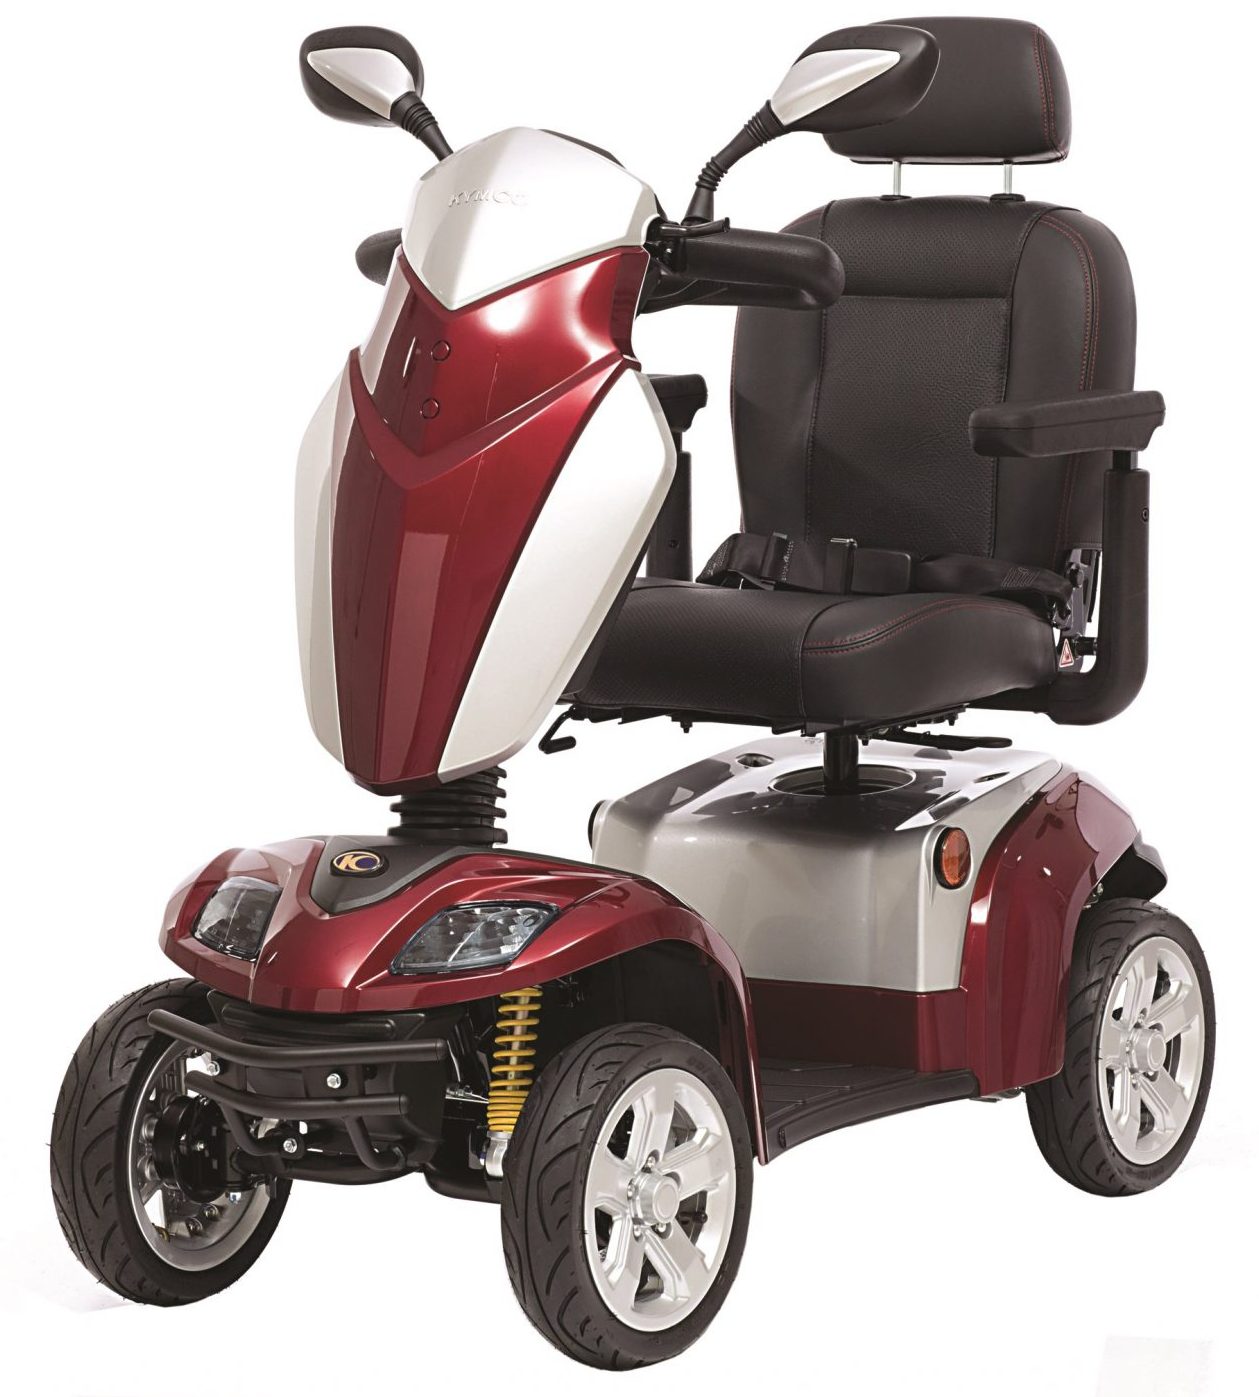 Kymco Agility Cherry Red 45 clean hr0 scooter